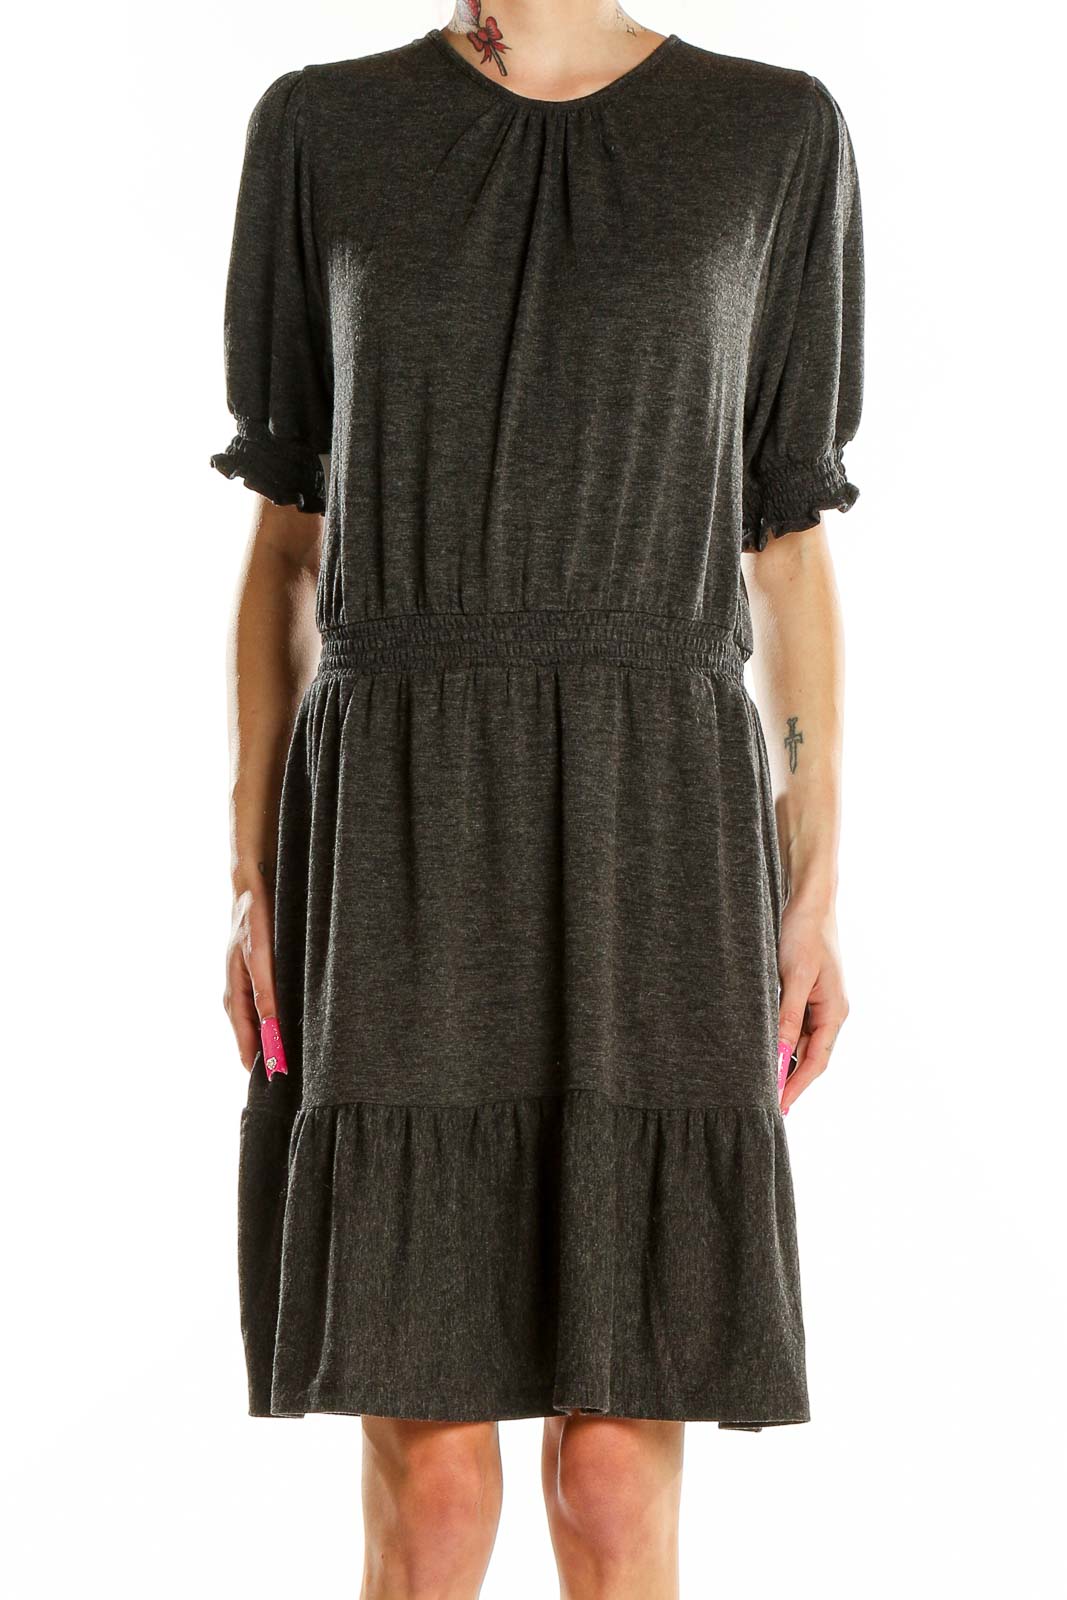 Gray Knit Casual Dress Front